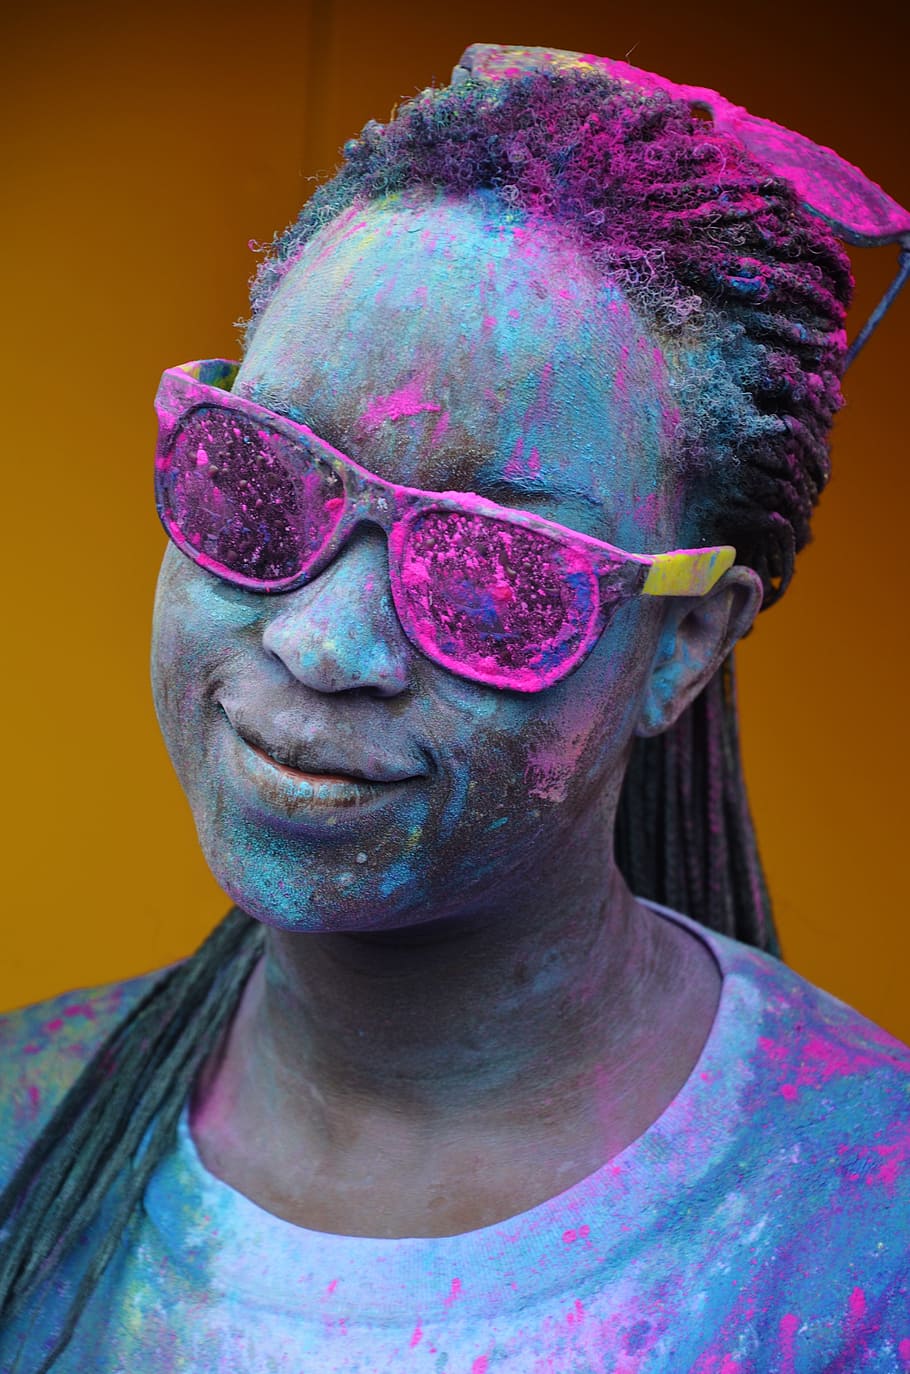 woman in gray shirt wearing sunglasses, girl, colorful, funny